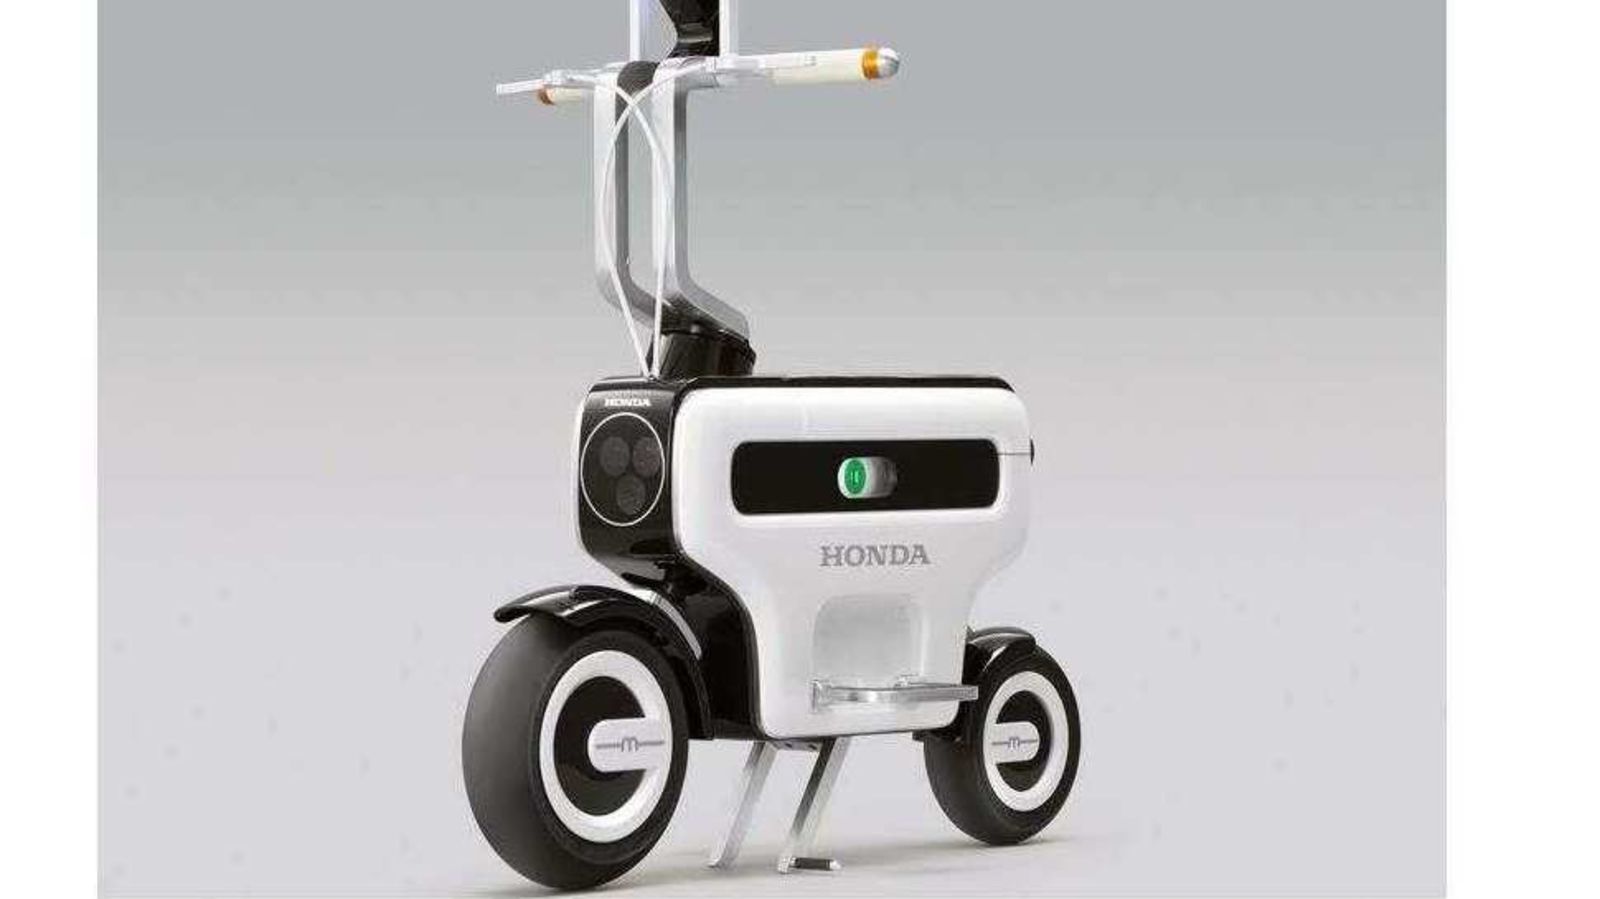 Honda folding scooter may return in modern avatar, suggests